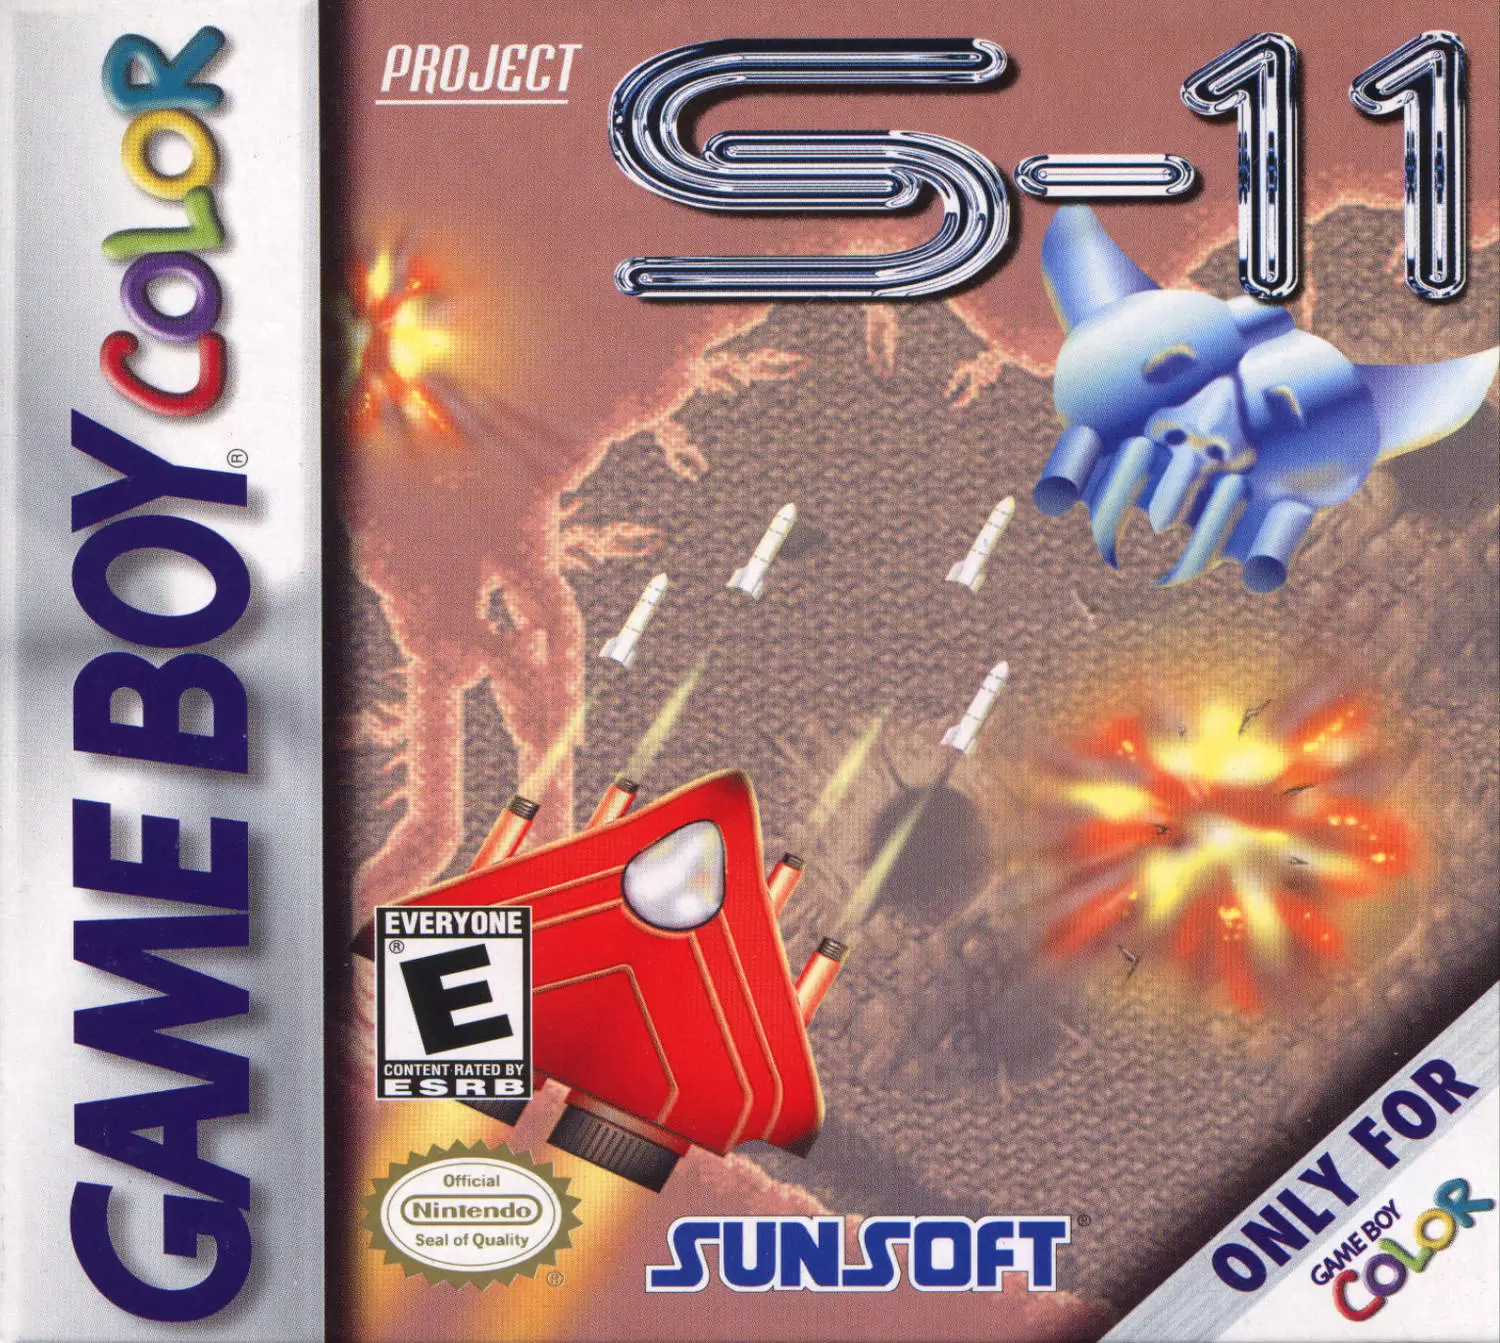 Game Boy Color Games - Project S-11